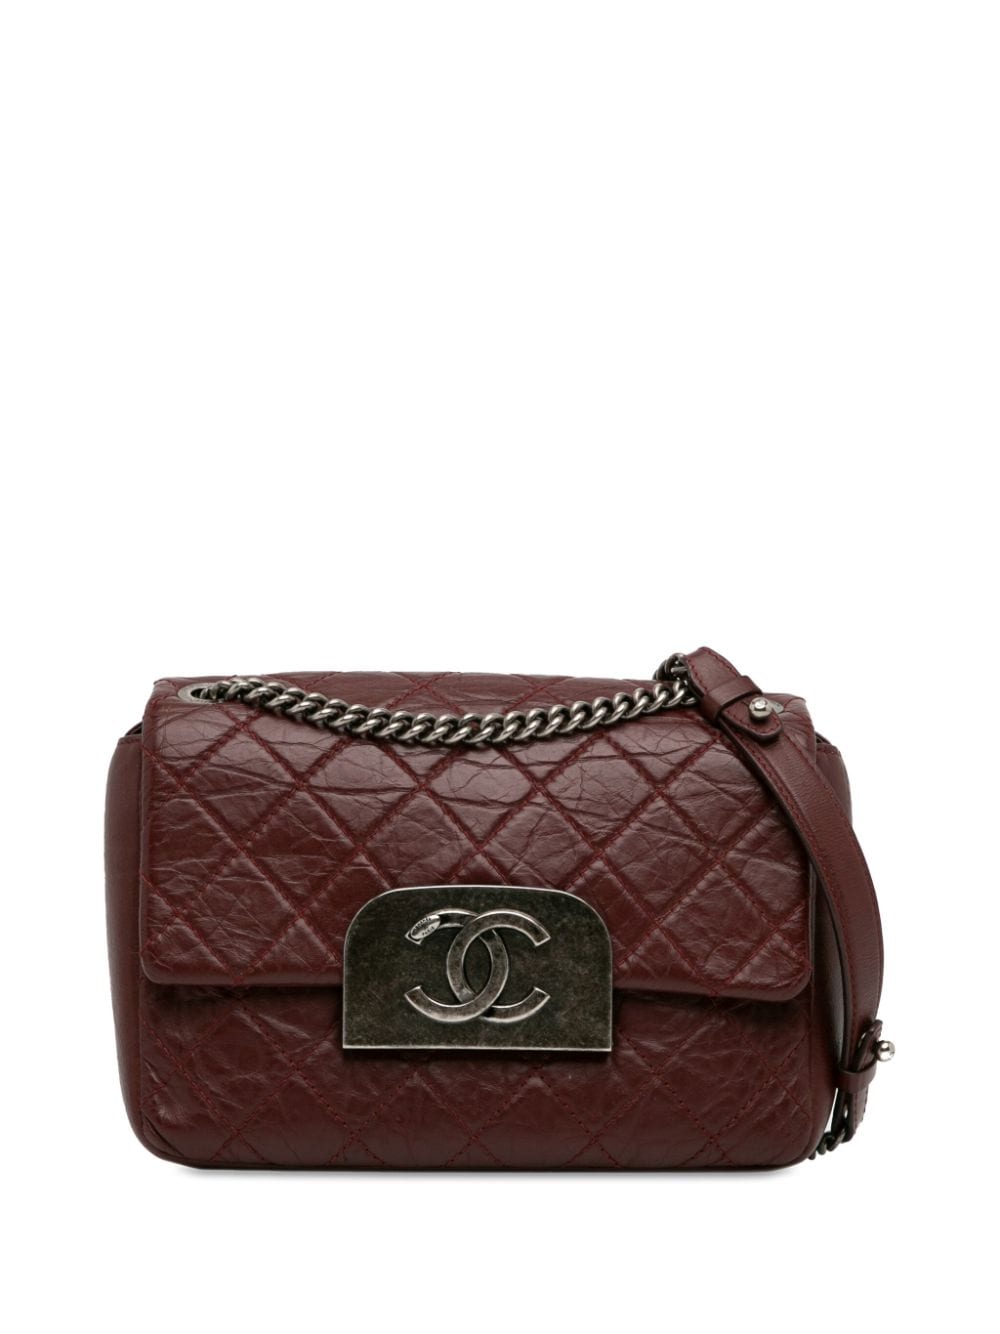 Pre-owned Chanel 2012-2013 Aged Calfskin Cc Square Flap Crossbody Bag In Red